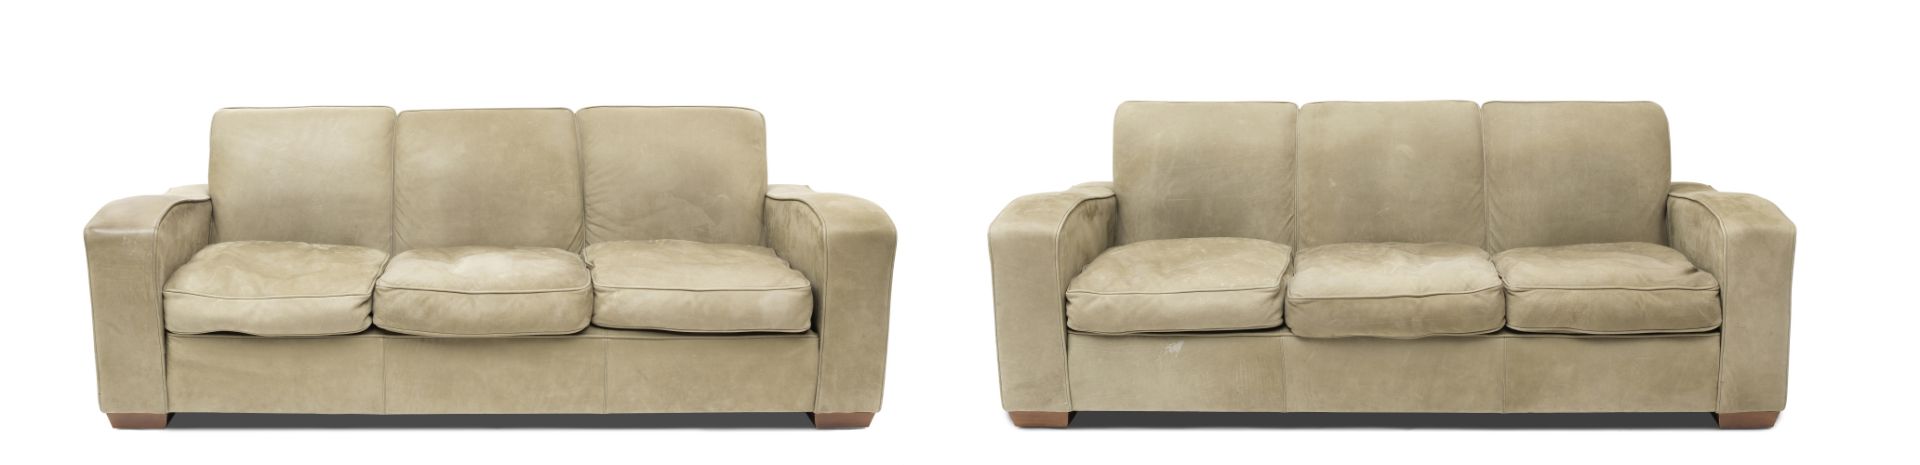 A large pair of green leather upholstered three-seater sofasSupplied by Art Forma (Furniture) Ltd...